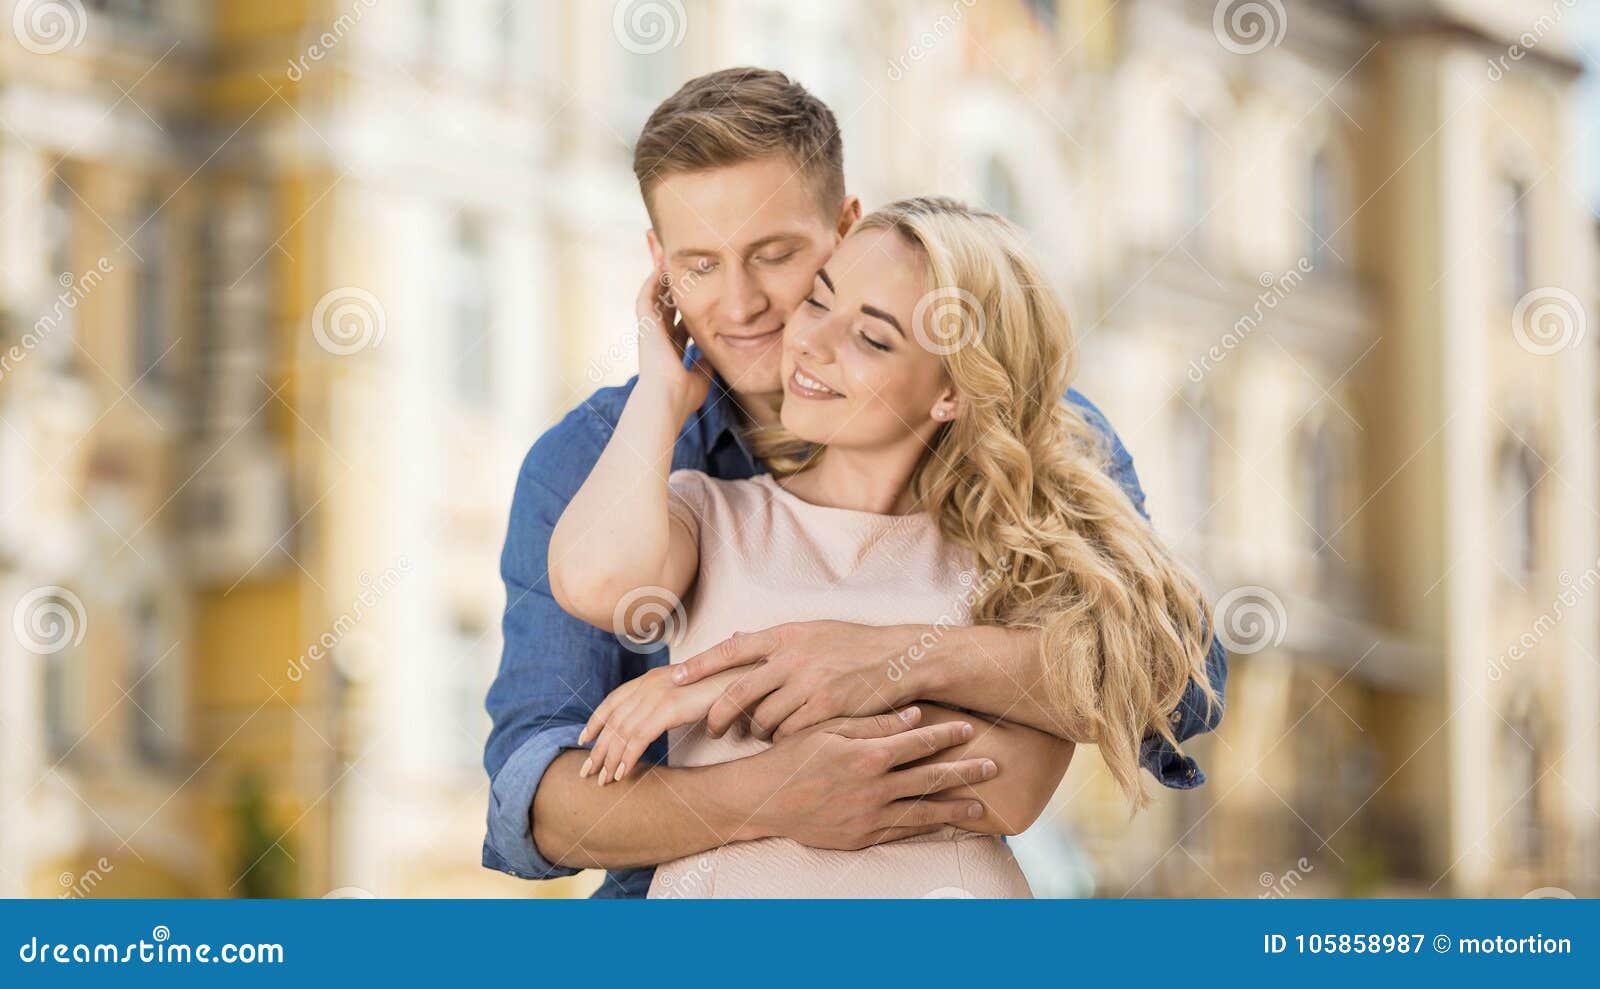 Young Man Hugging Girlfriend from Behind, Romantic Relationship ...